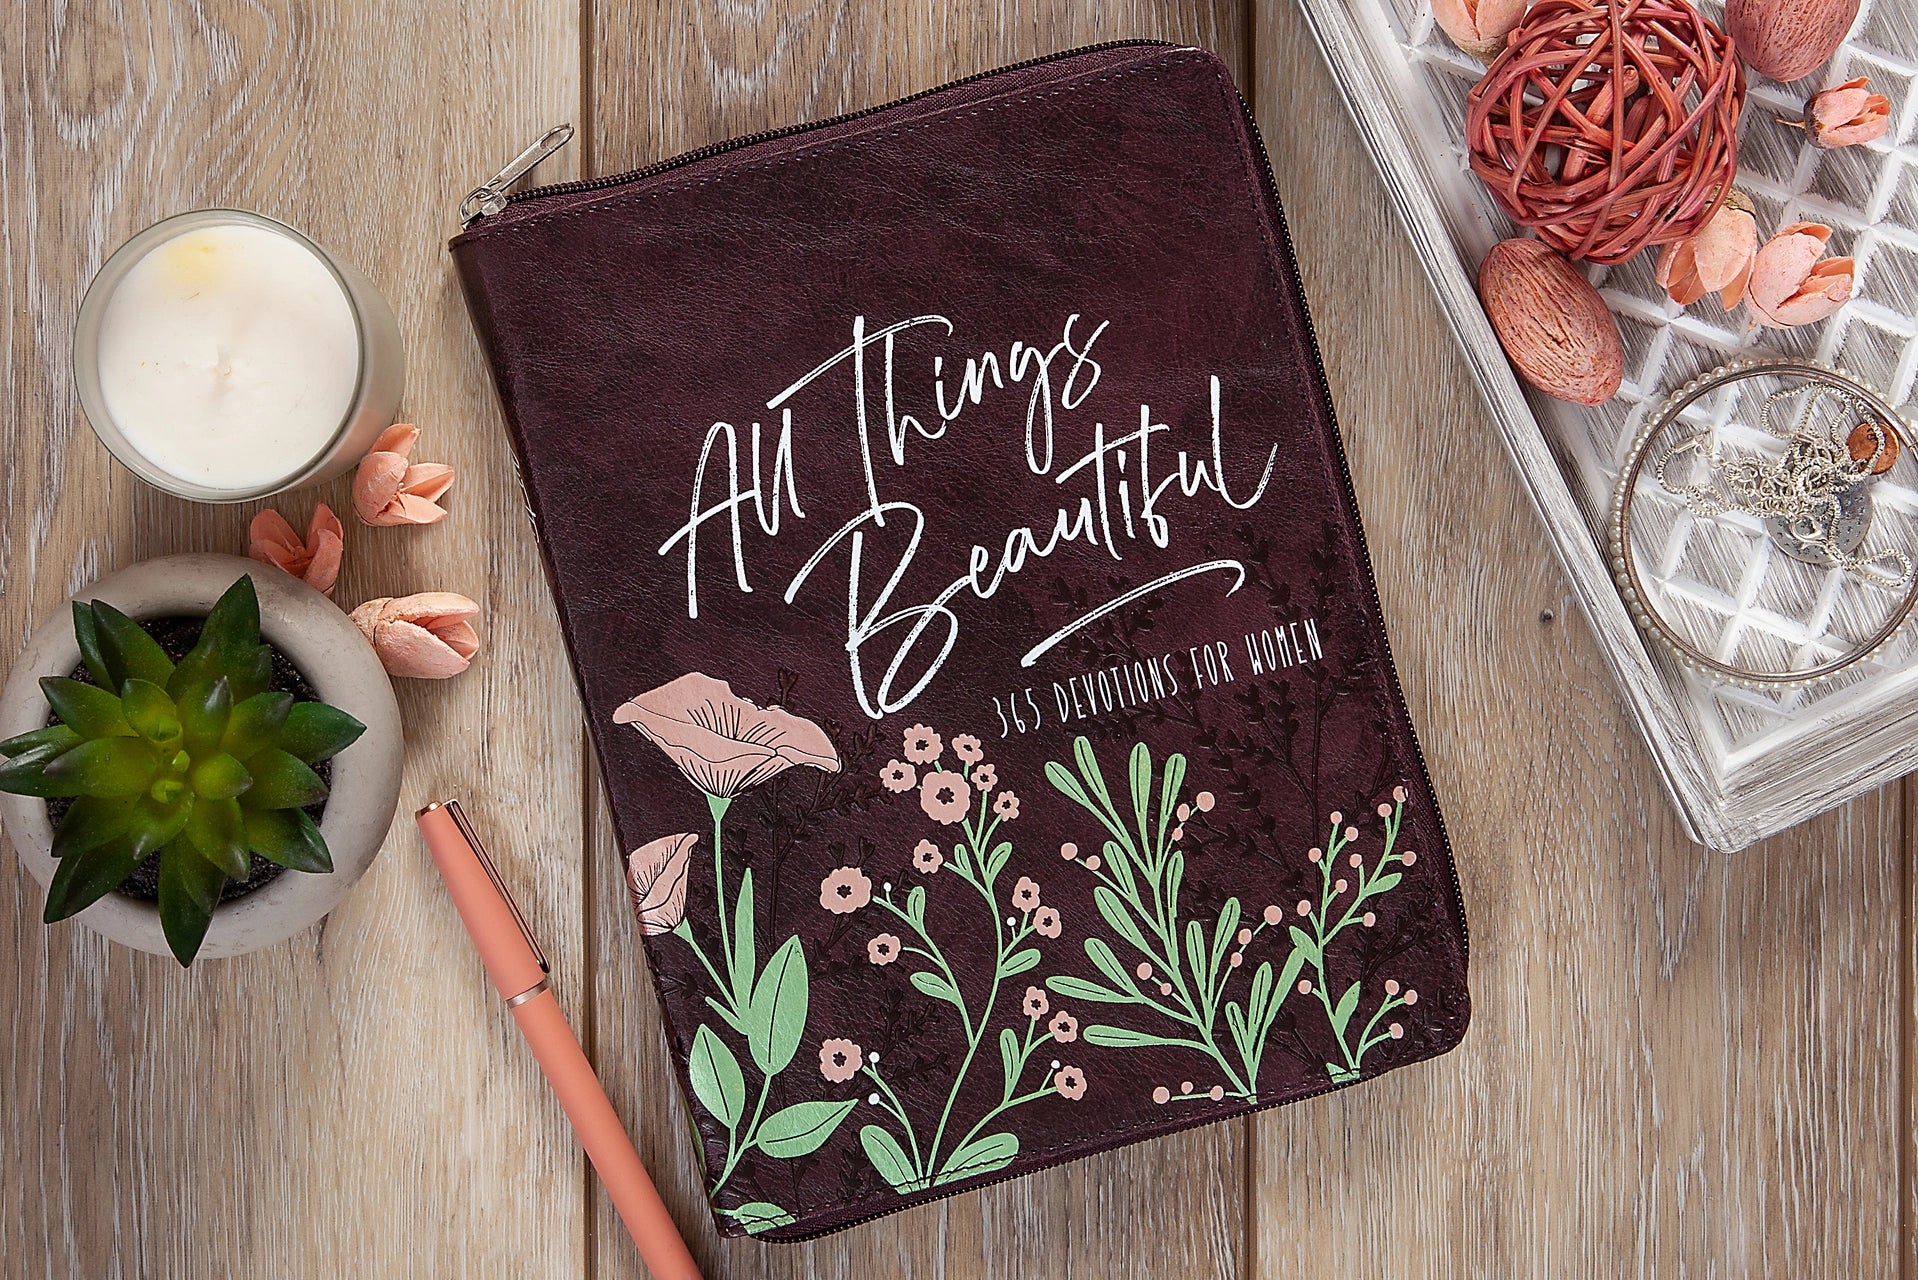 All Things Beautiful Zippered Devotional